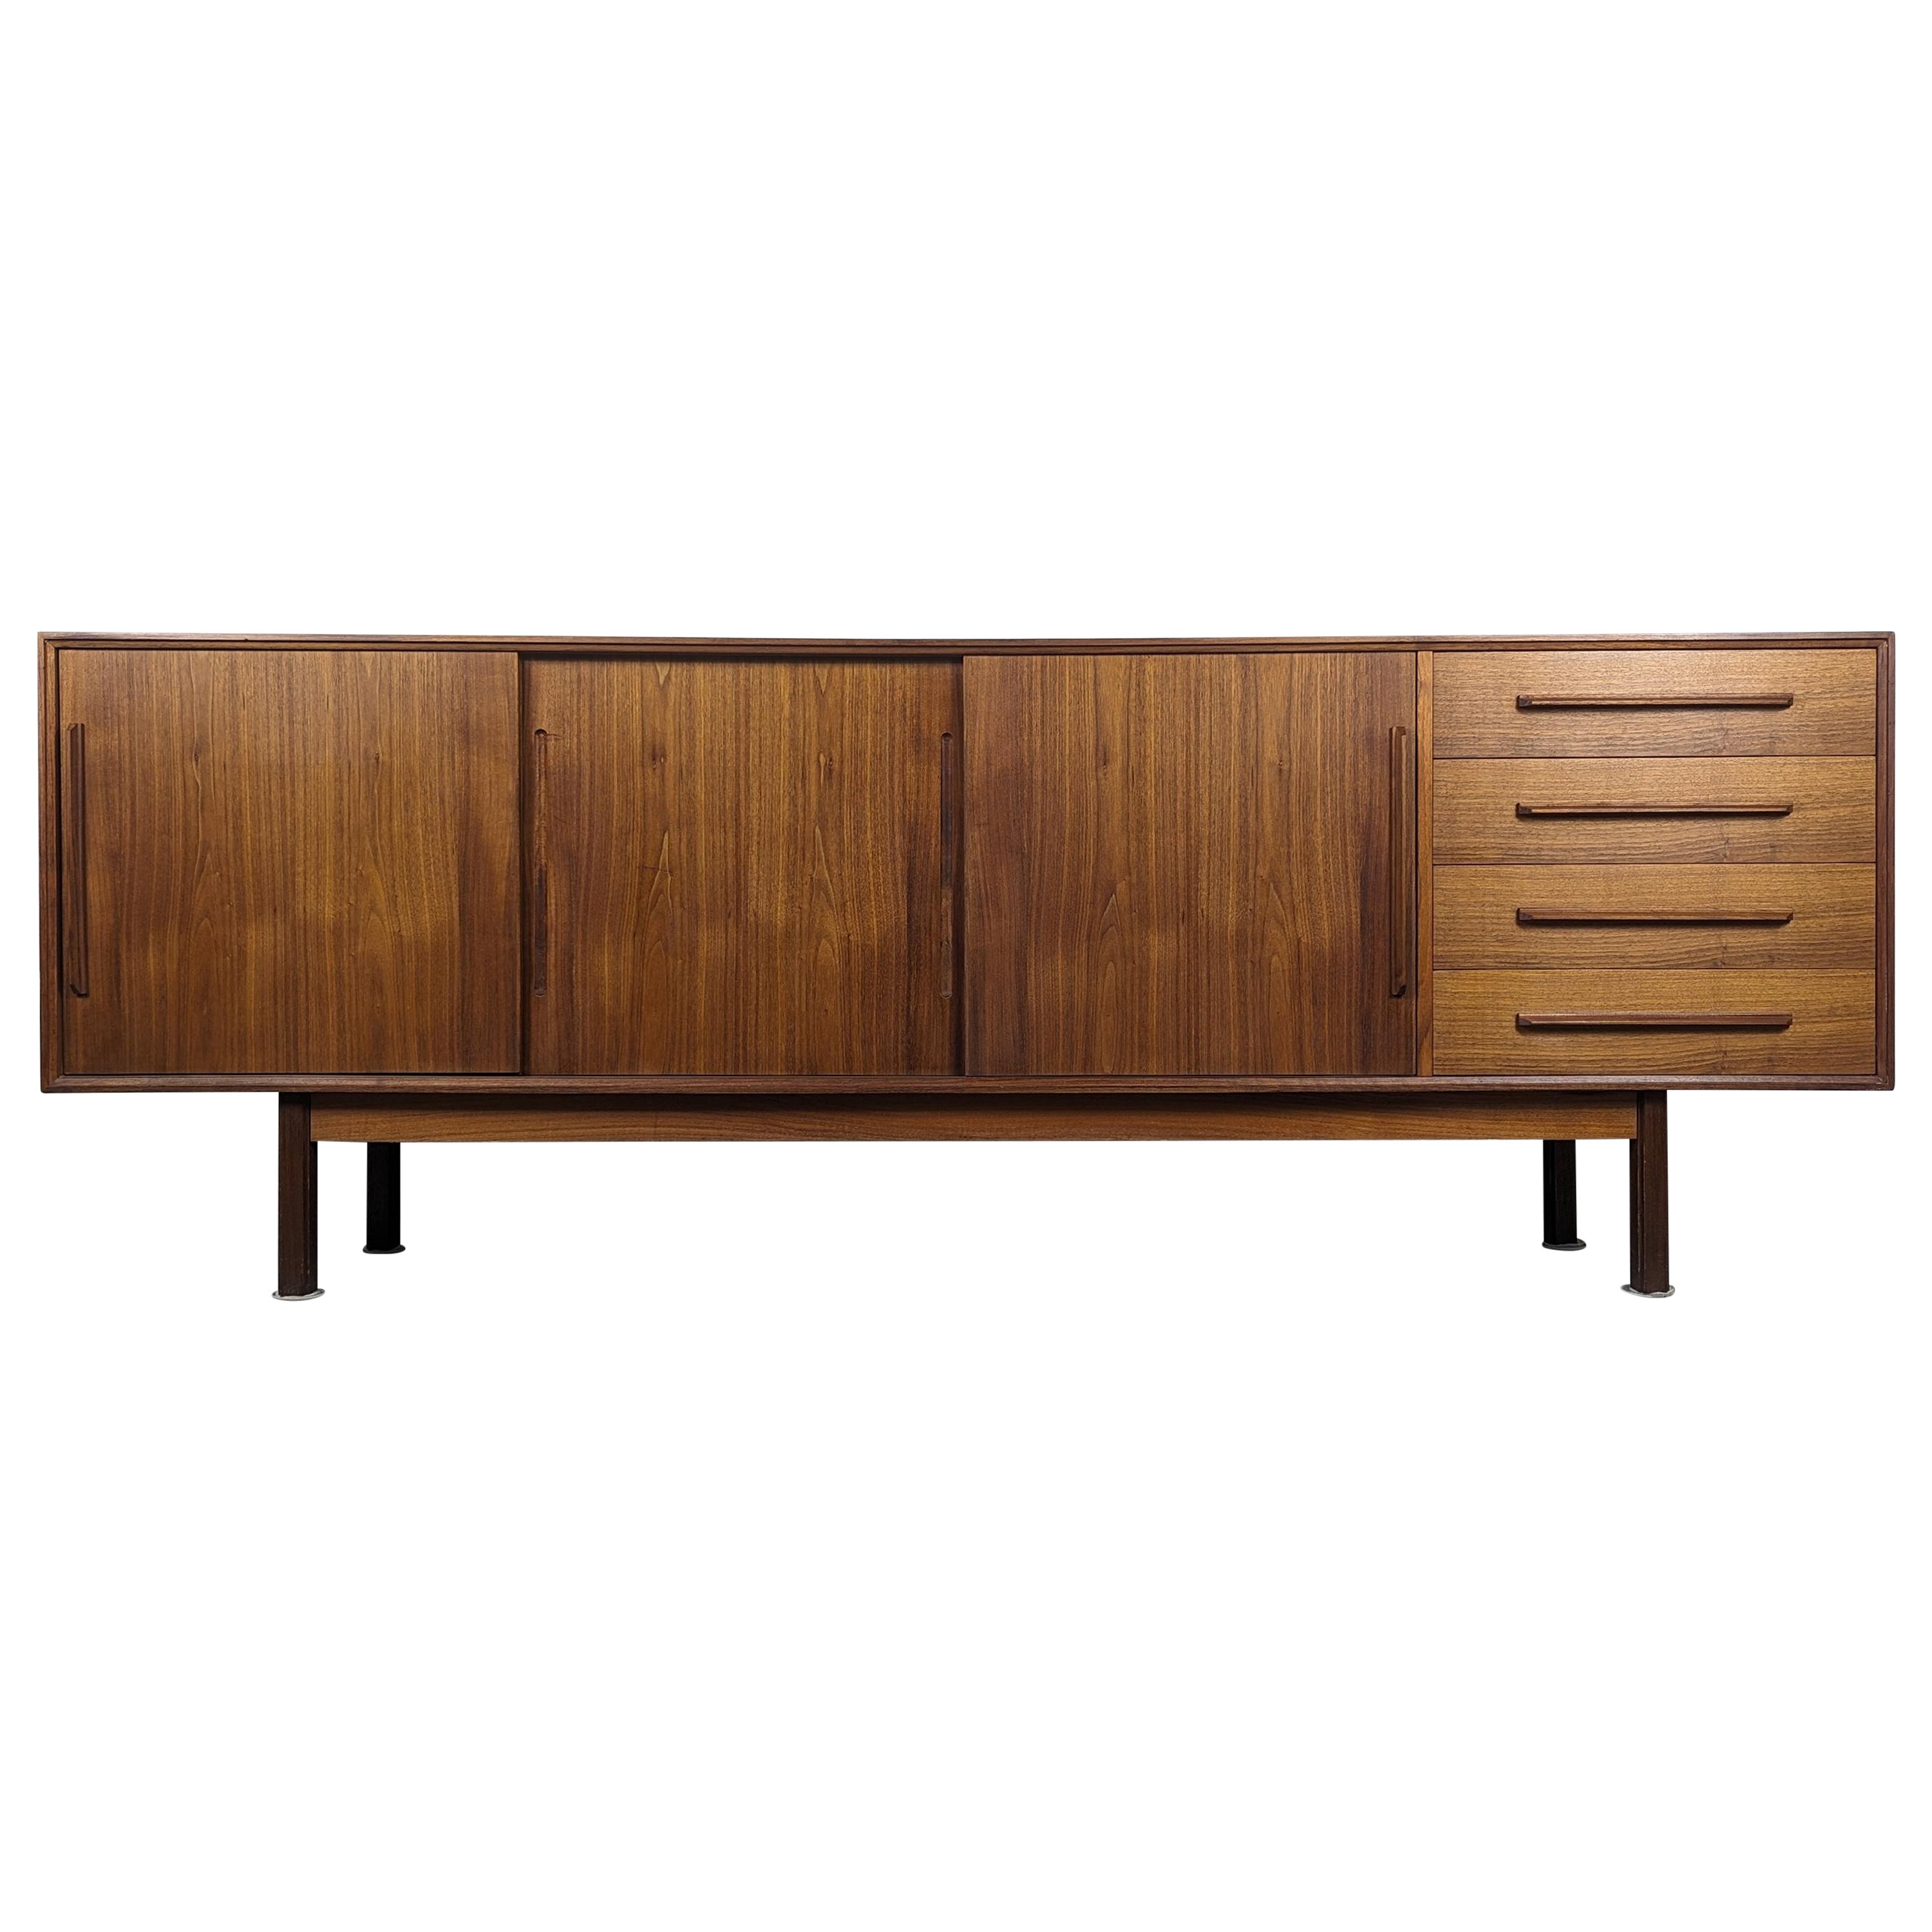 Mid Century Modern Teak Credenza/Buffet by Ib Kofod-Larsen for Faarup, c1960s For Sale